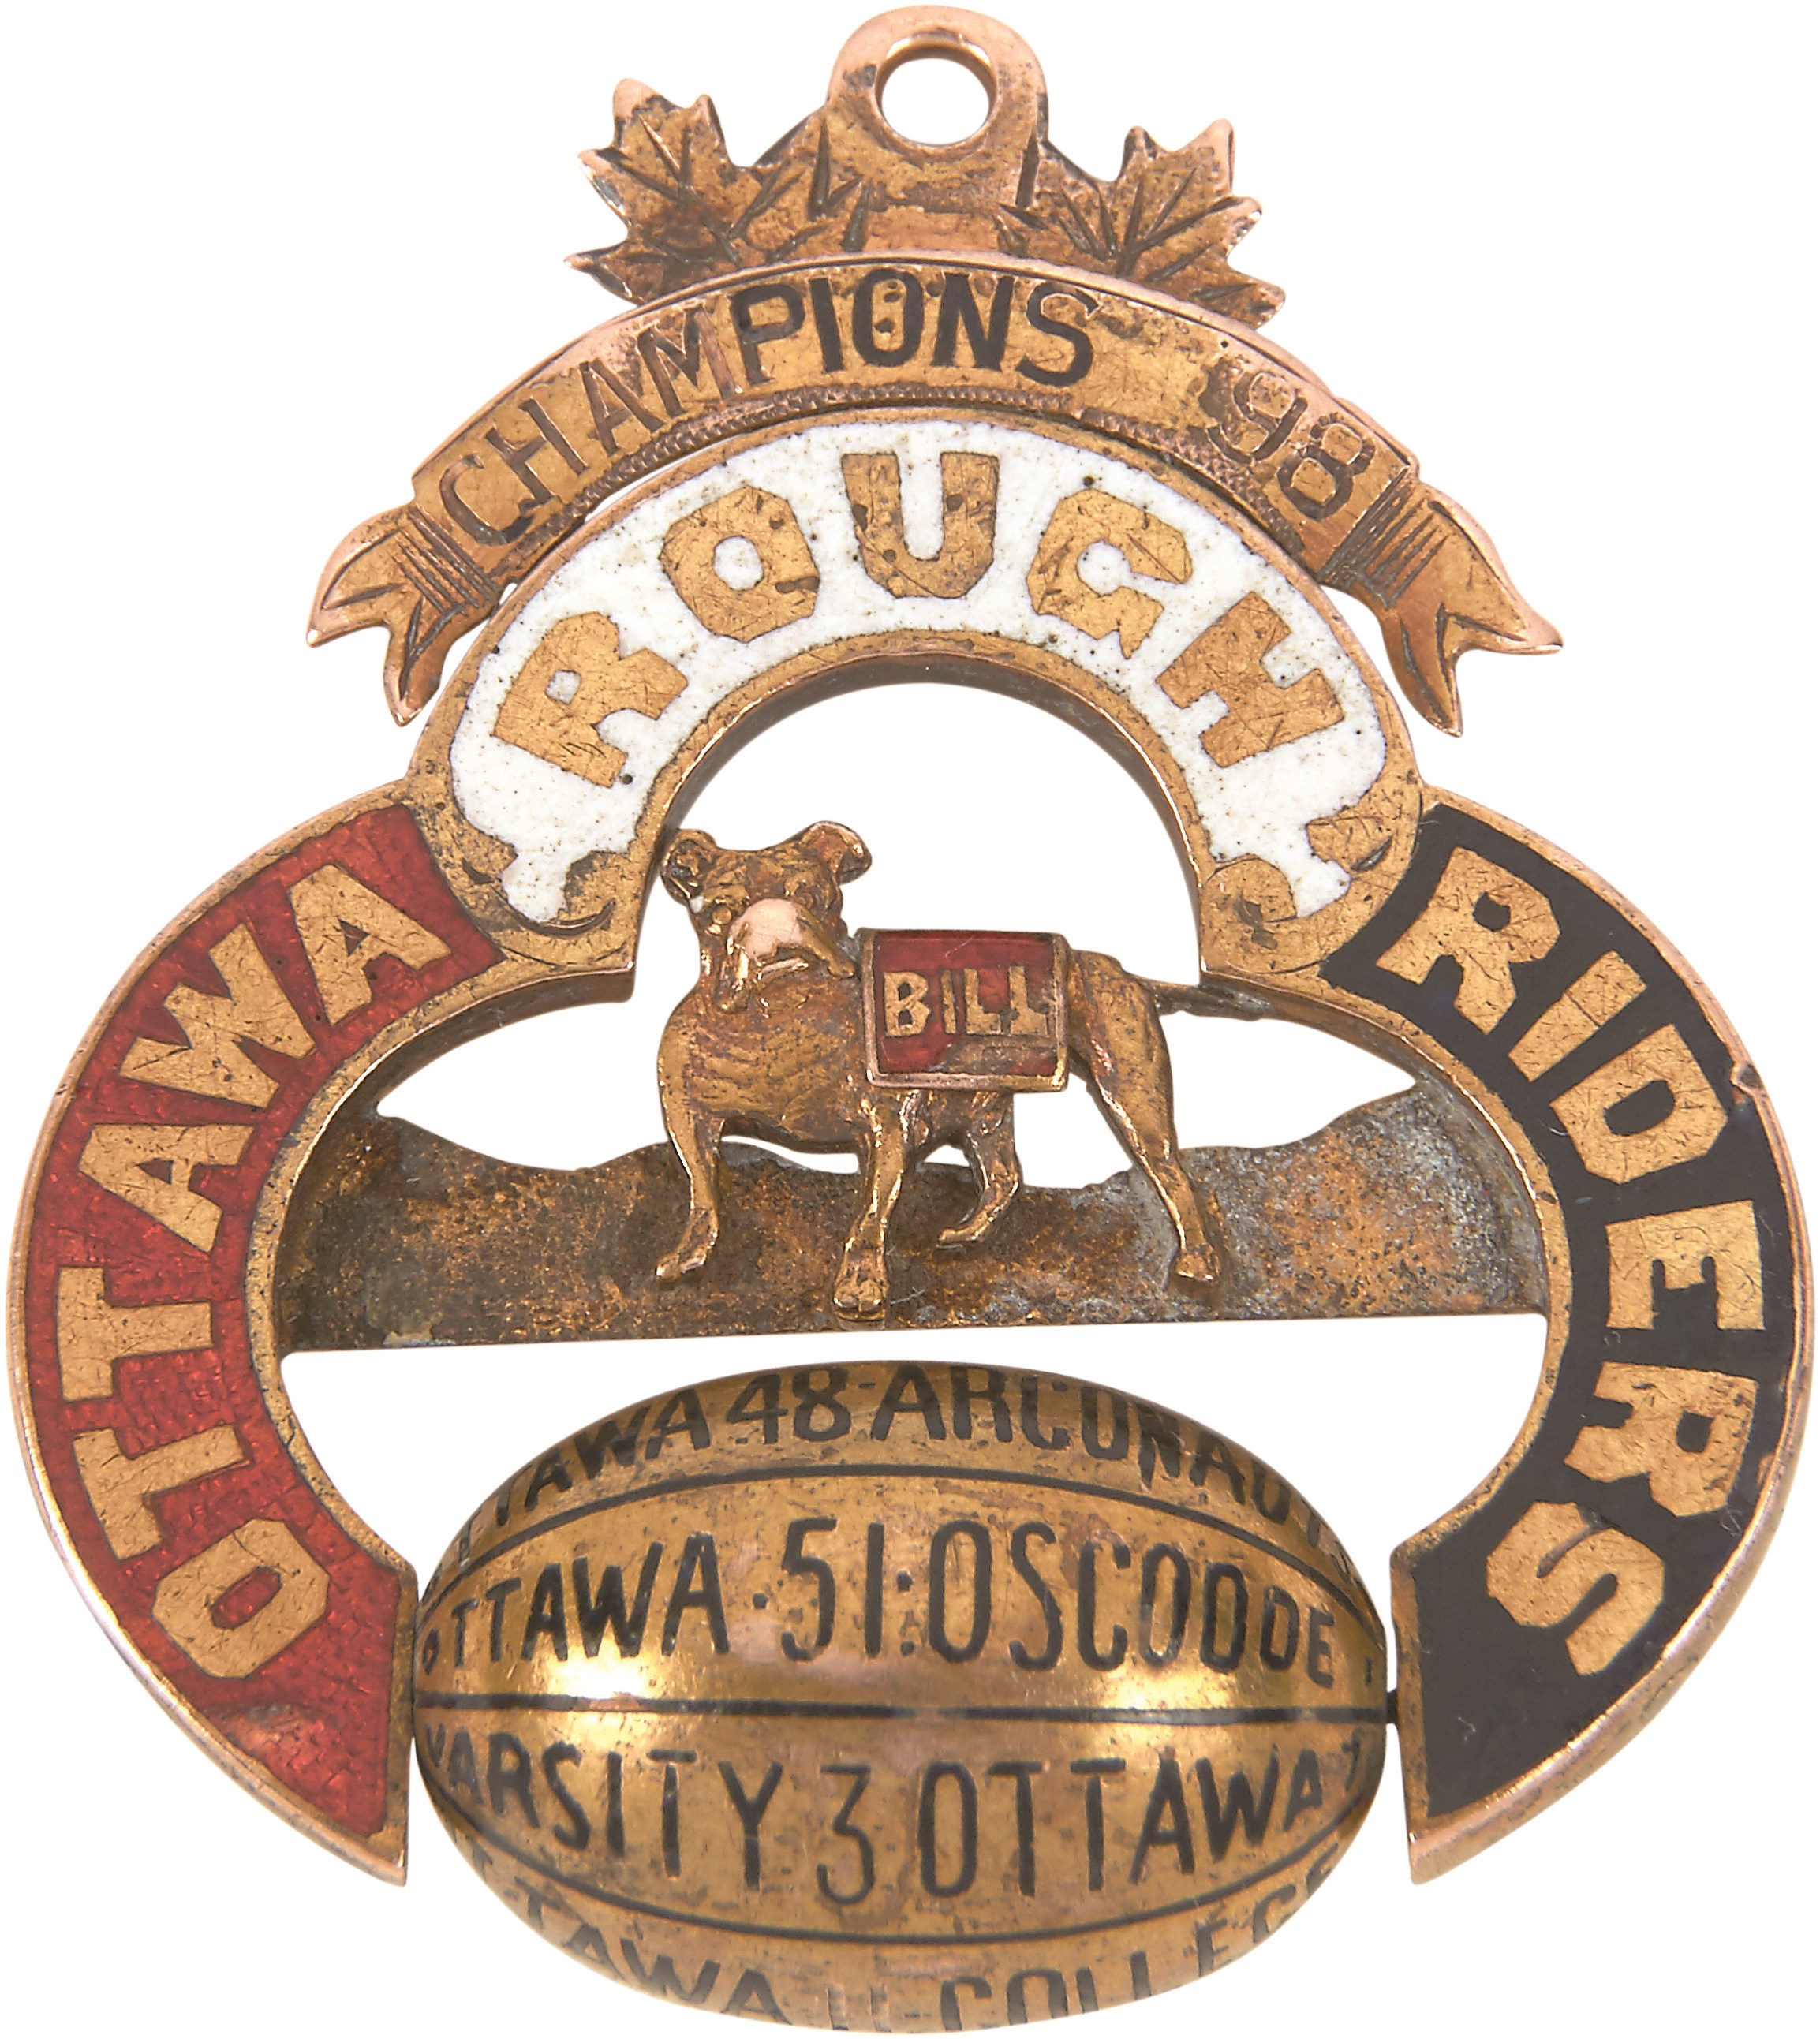 - First Ever Ottawa Rough Riders Football Championship Medal (1898)